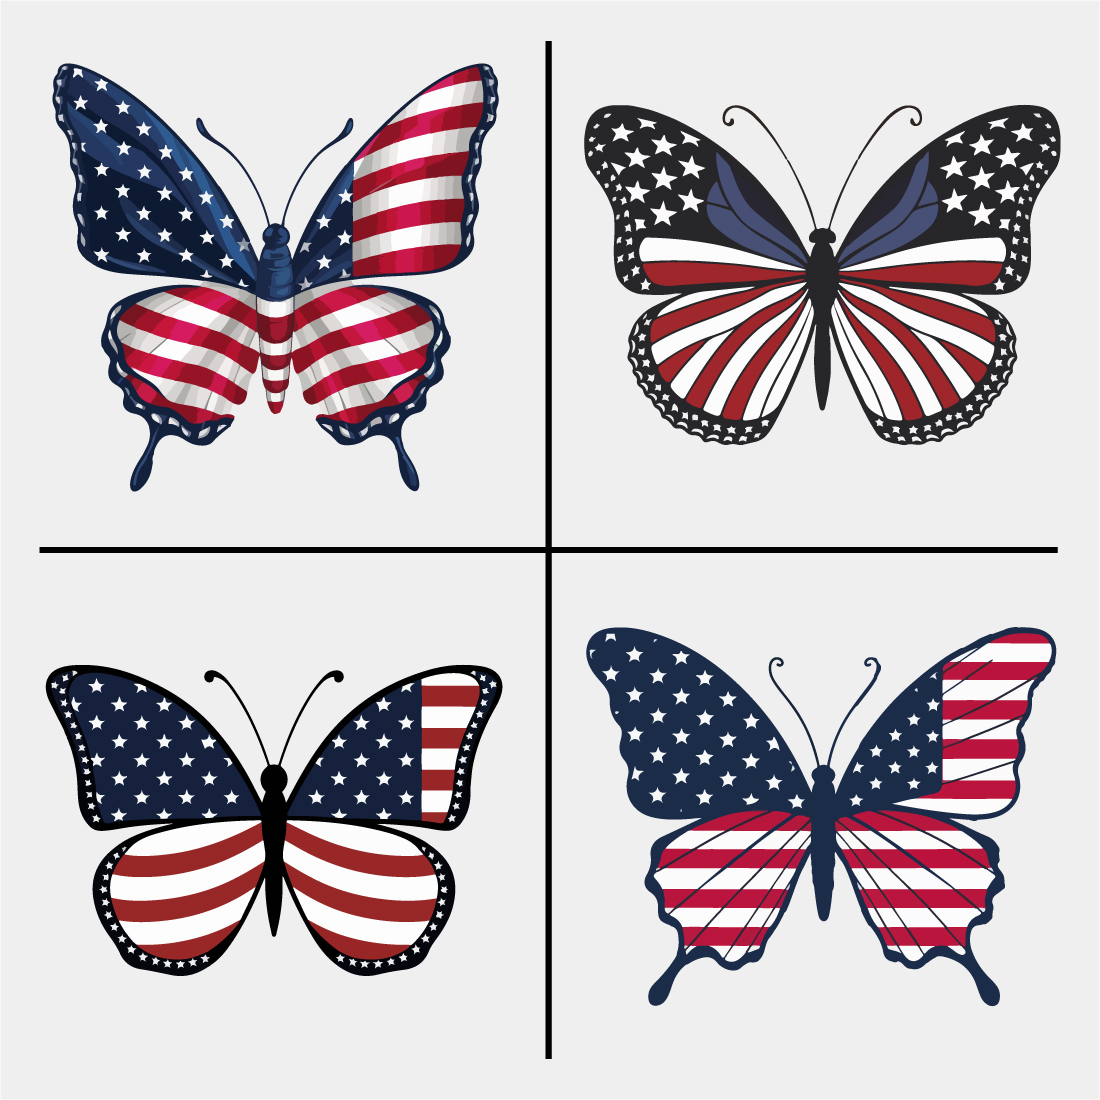 butterfly and american flag t shirt design.jpg 01 307